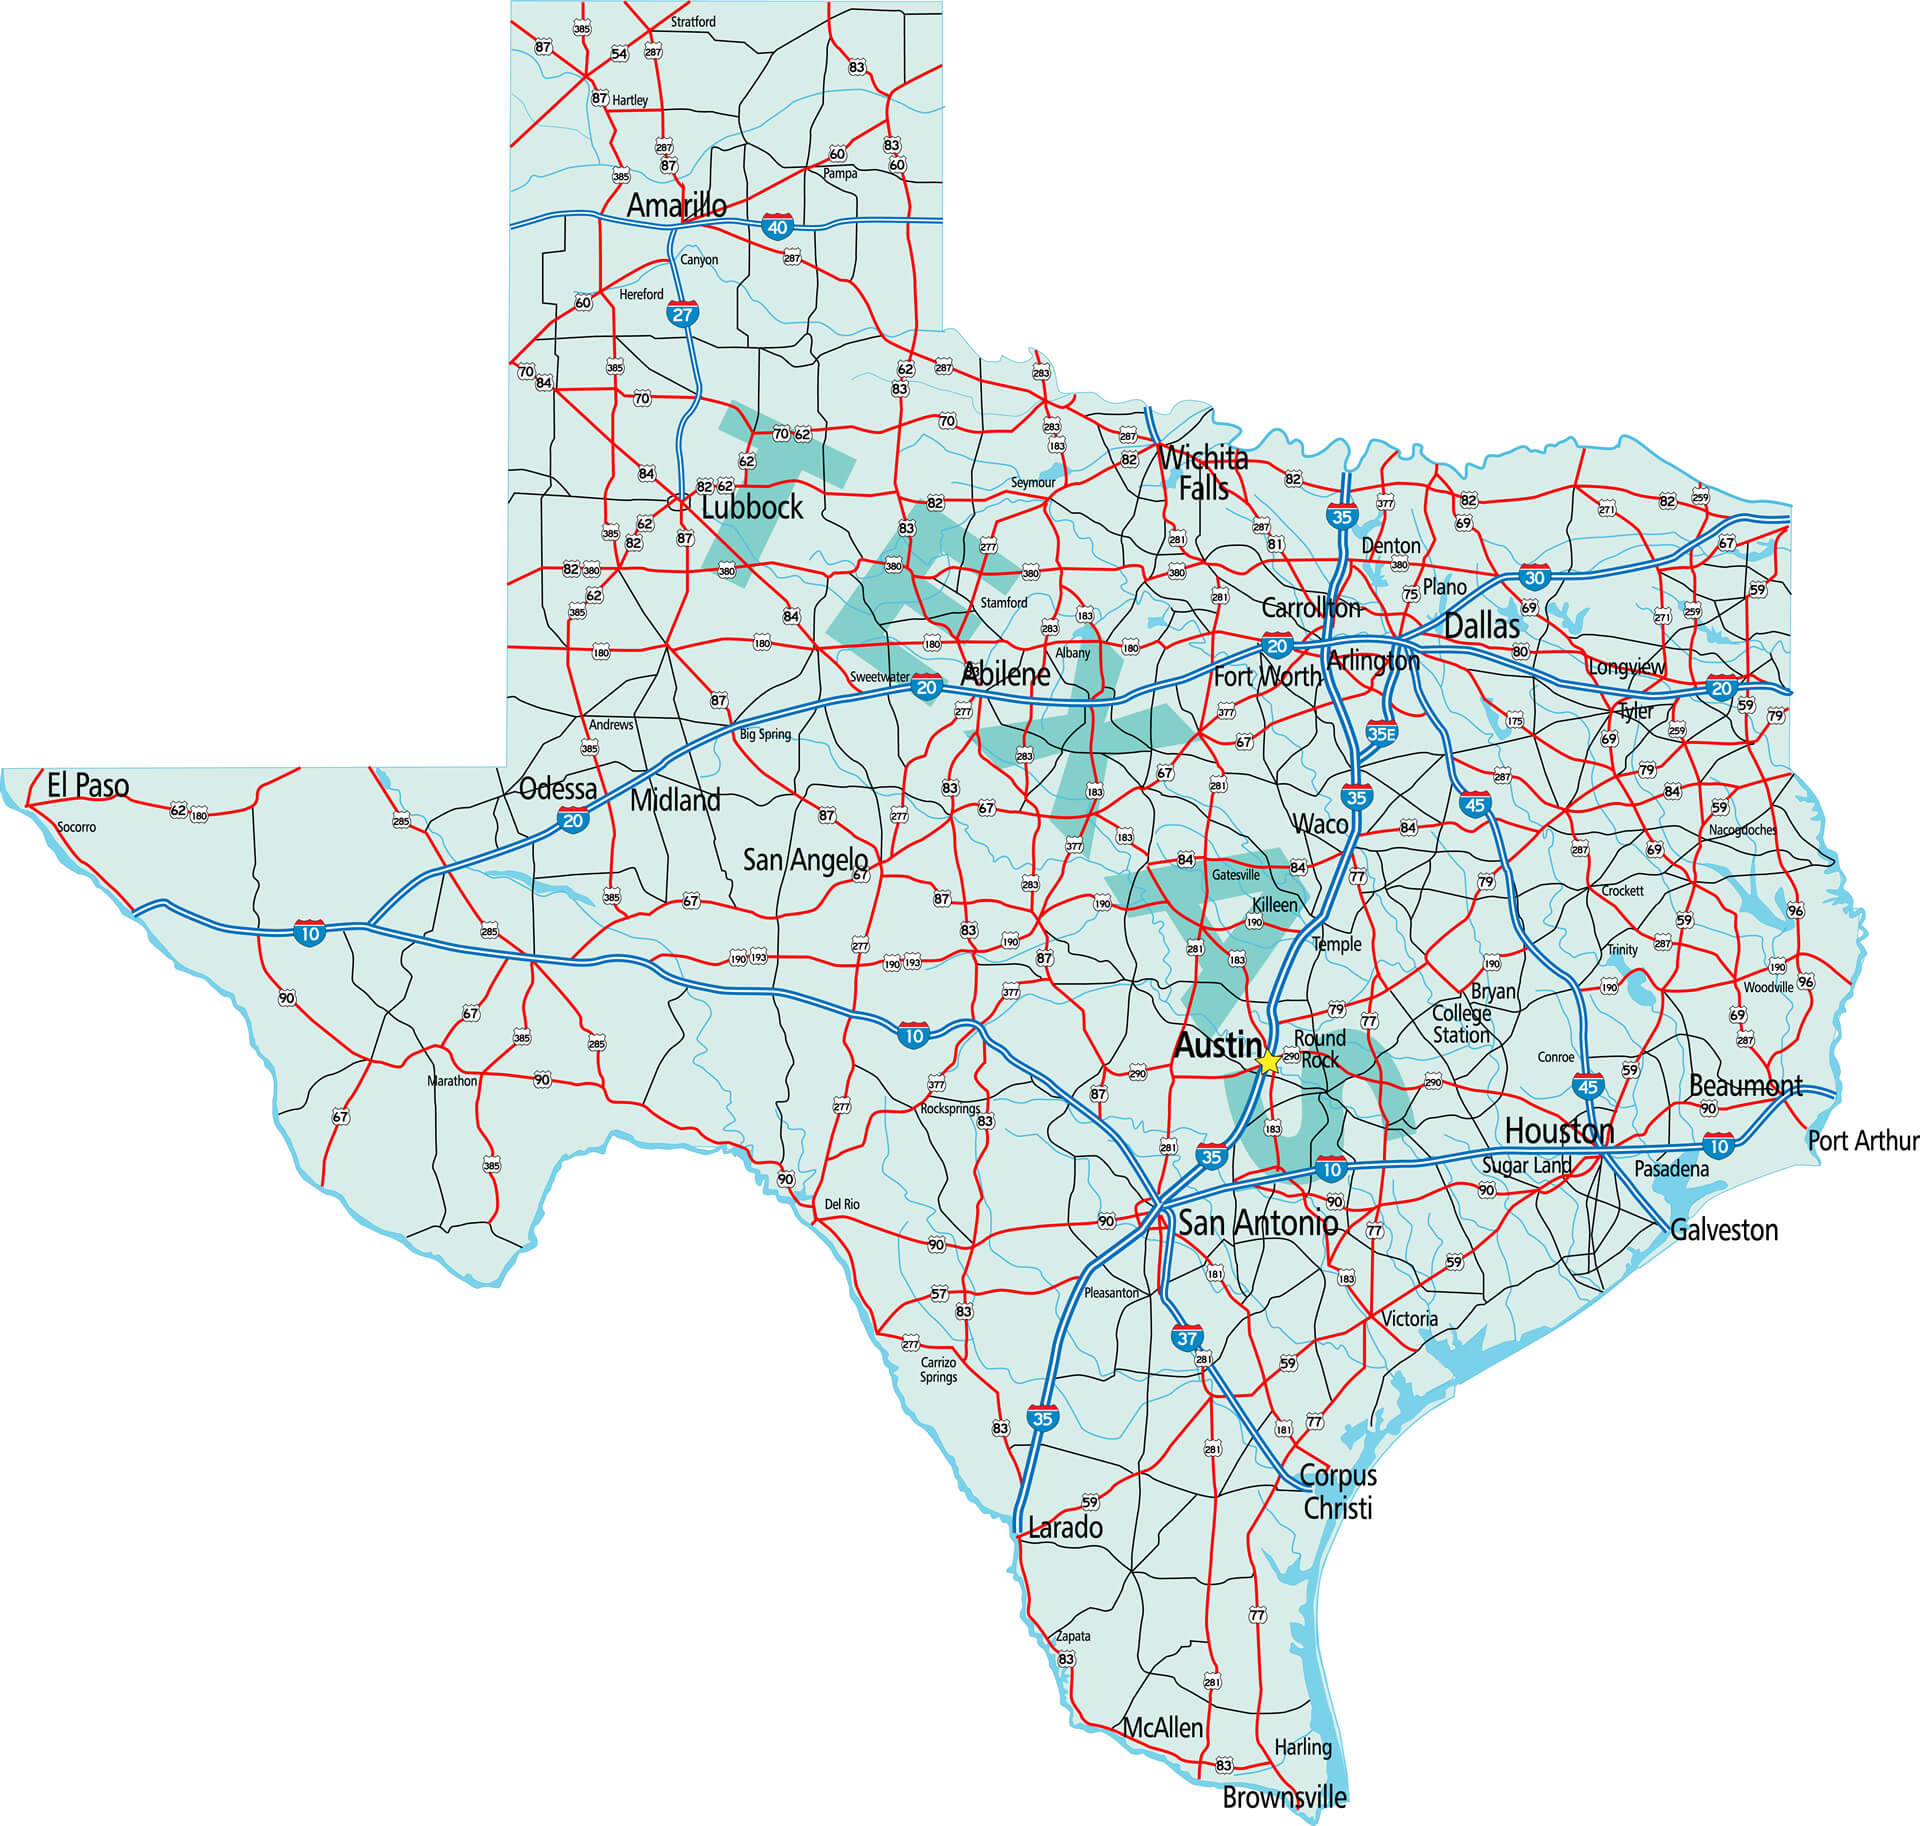 Texas State Interstate and US Highway Map